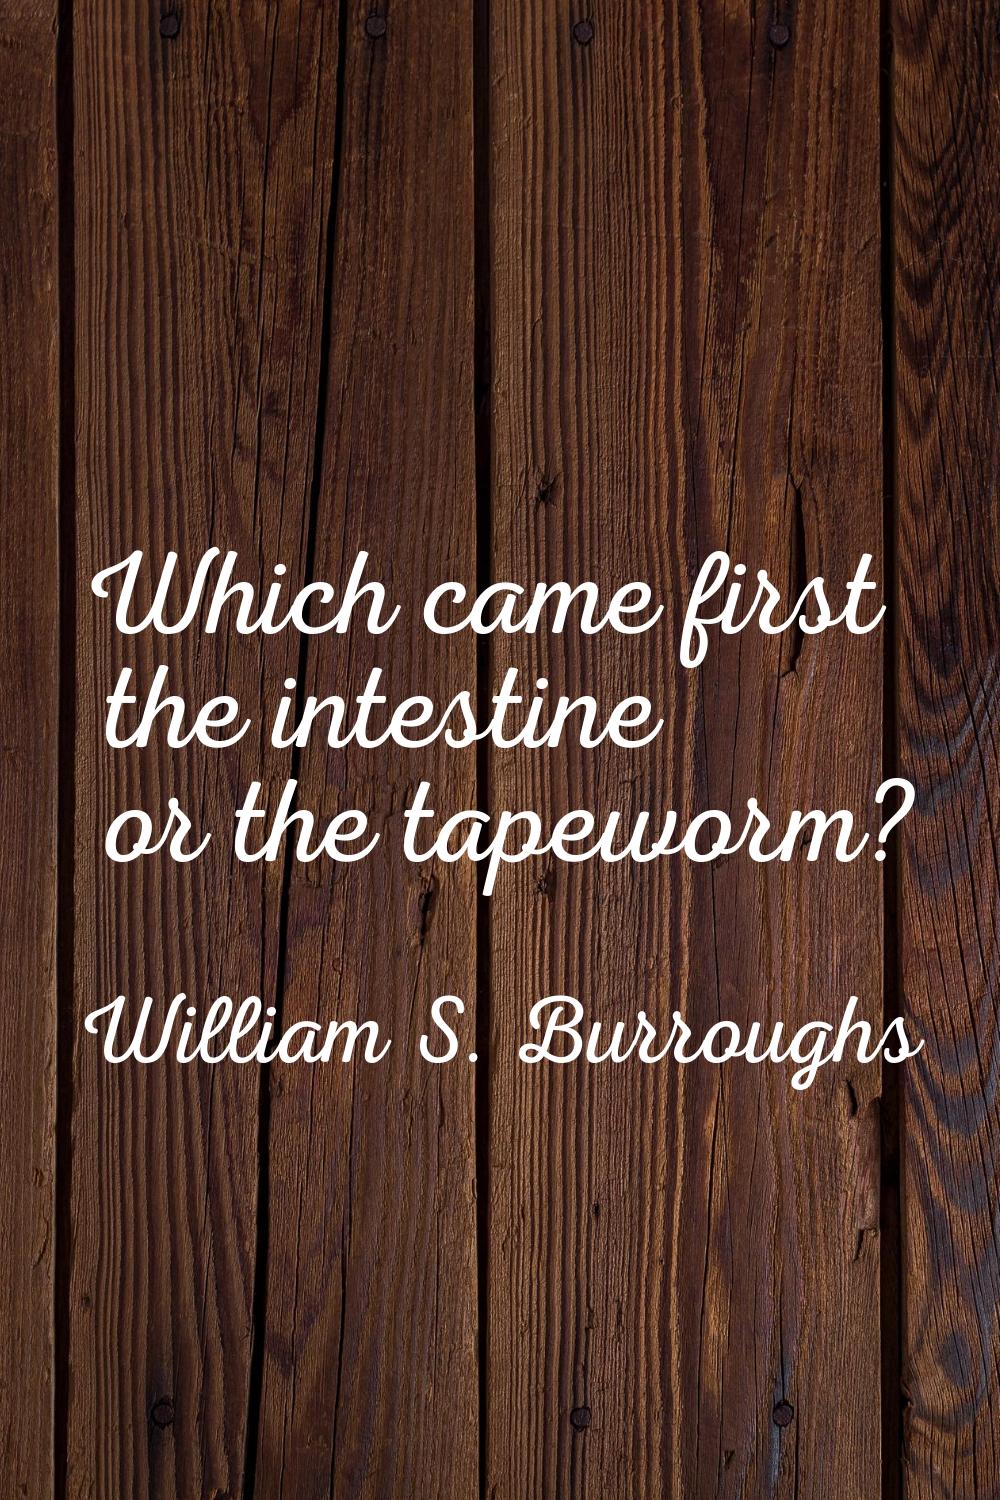 Which came first the intestine or the tapeworm?